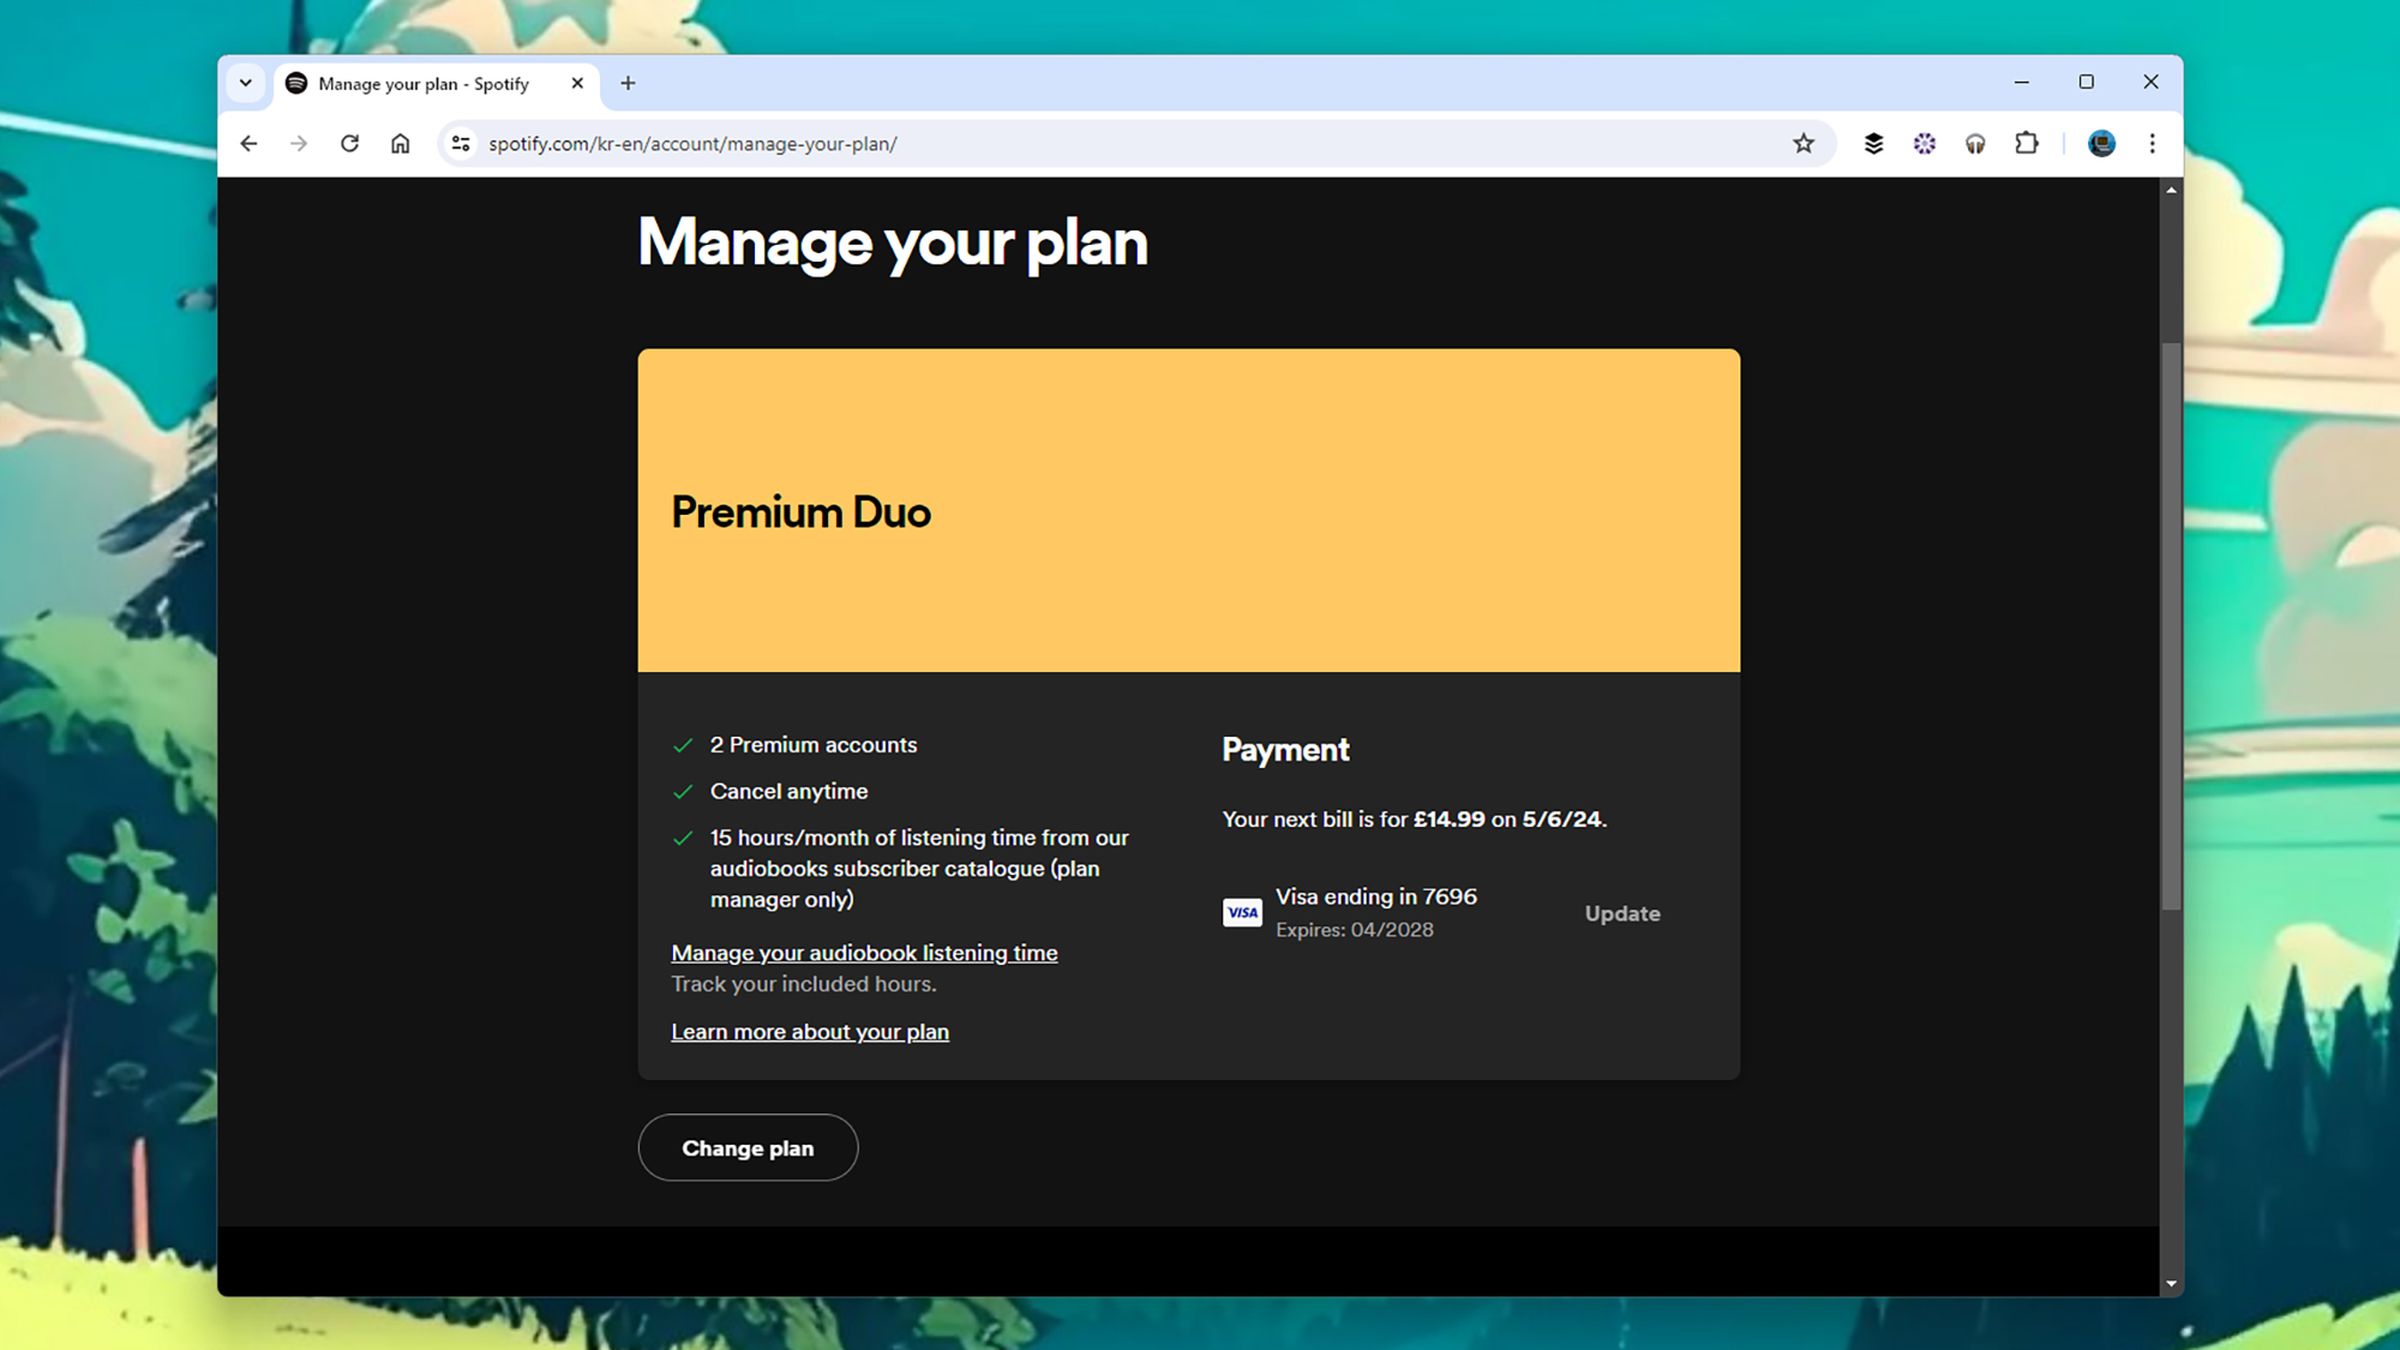 Desktop window with Manage your plan on top and the specifics for the Premium Duo plan.